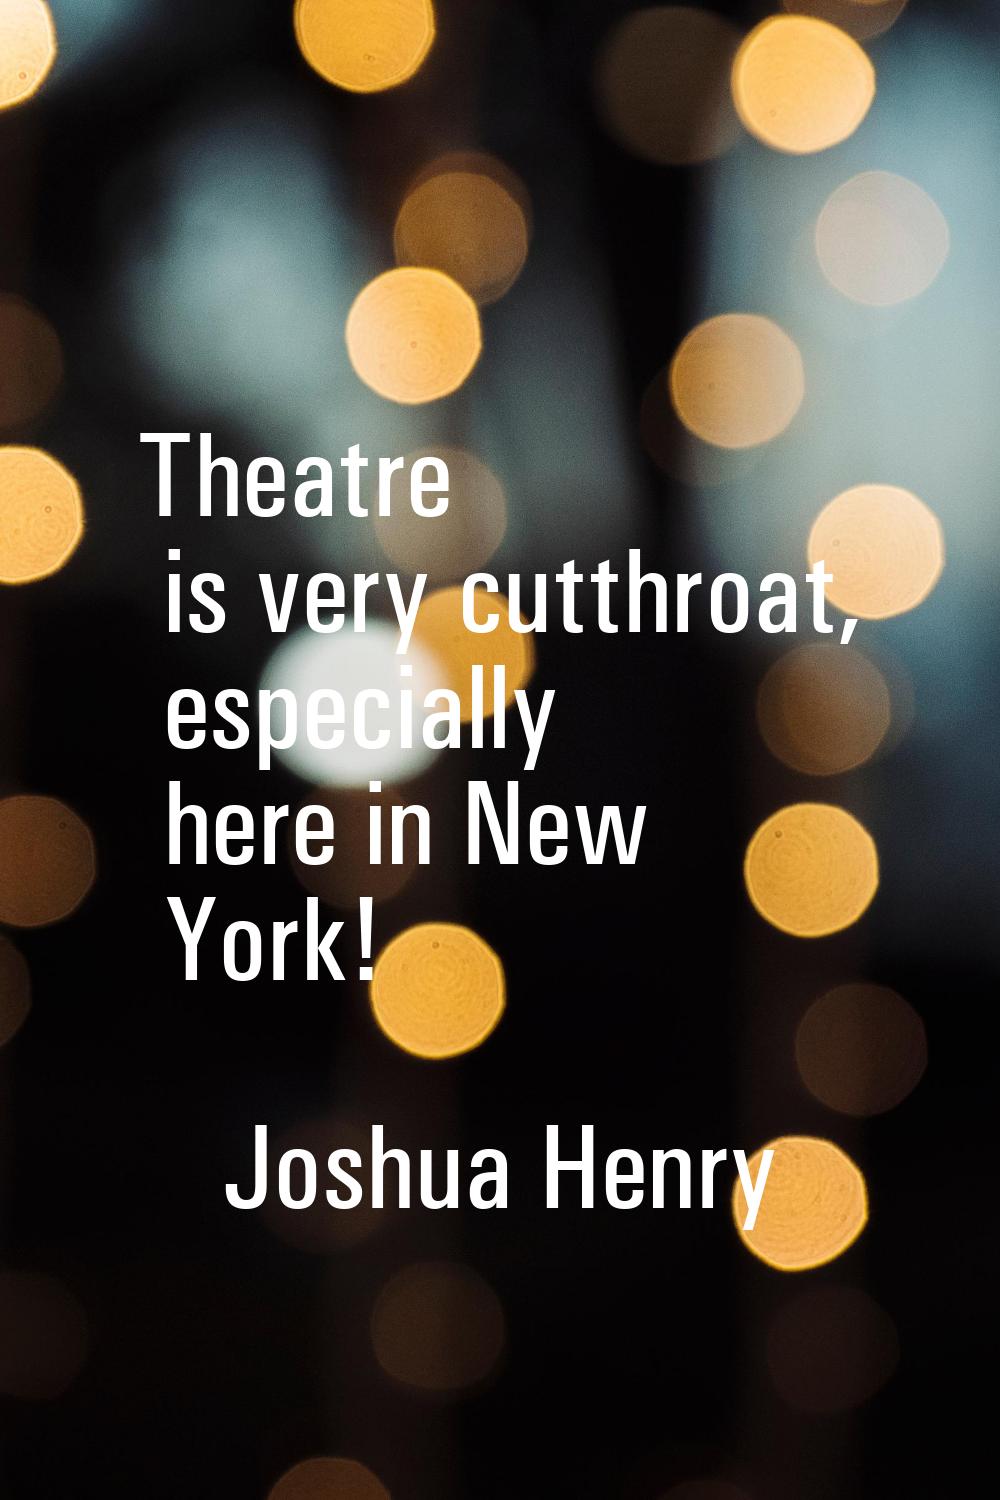 Theatre is very cutthroat, especially here in New York!